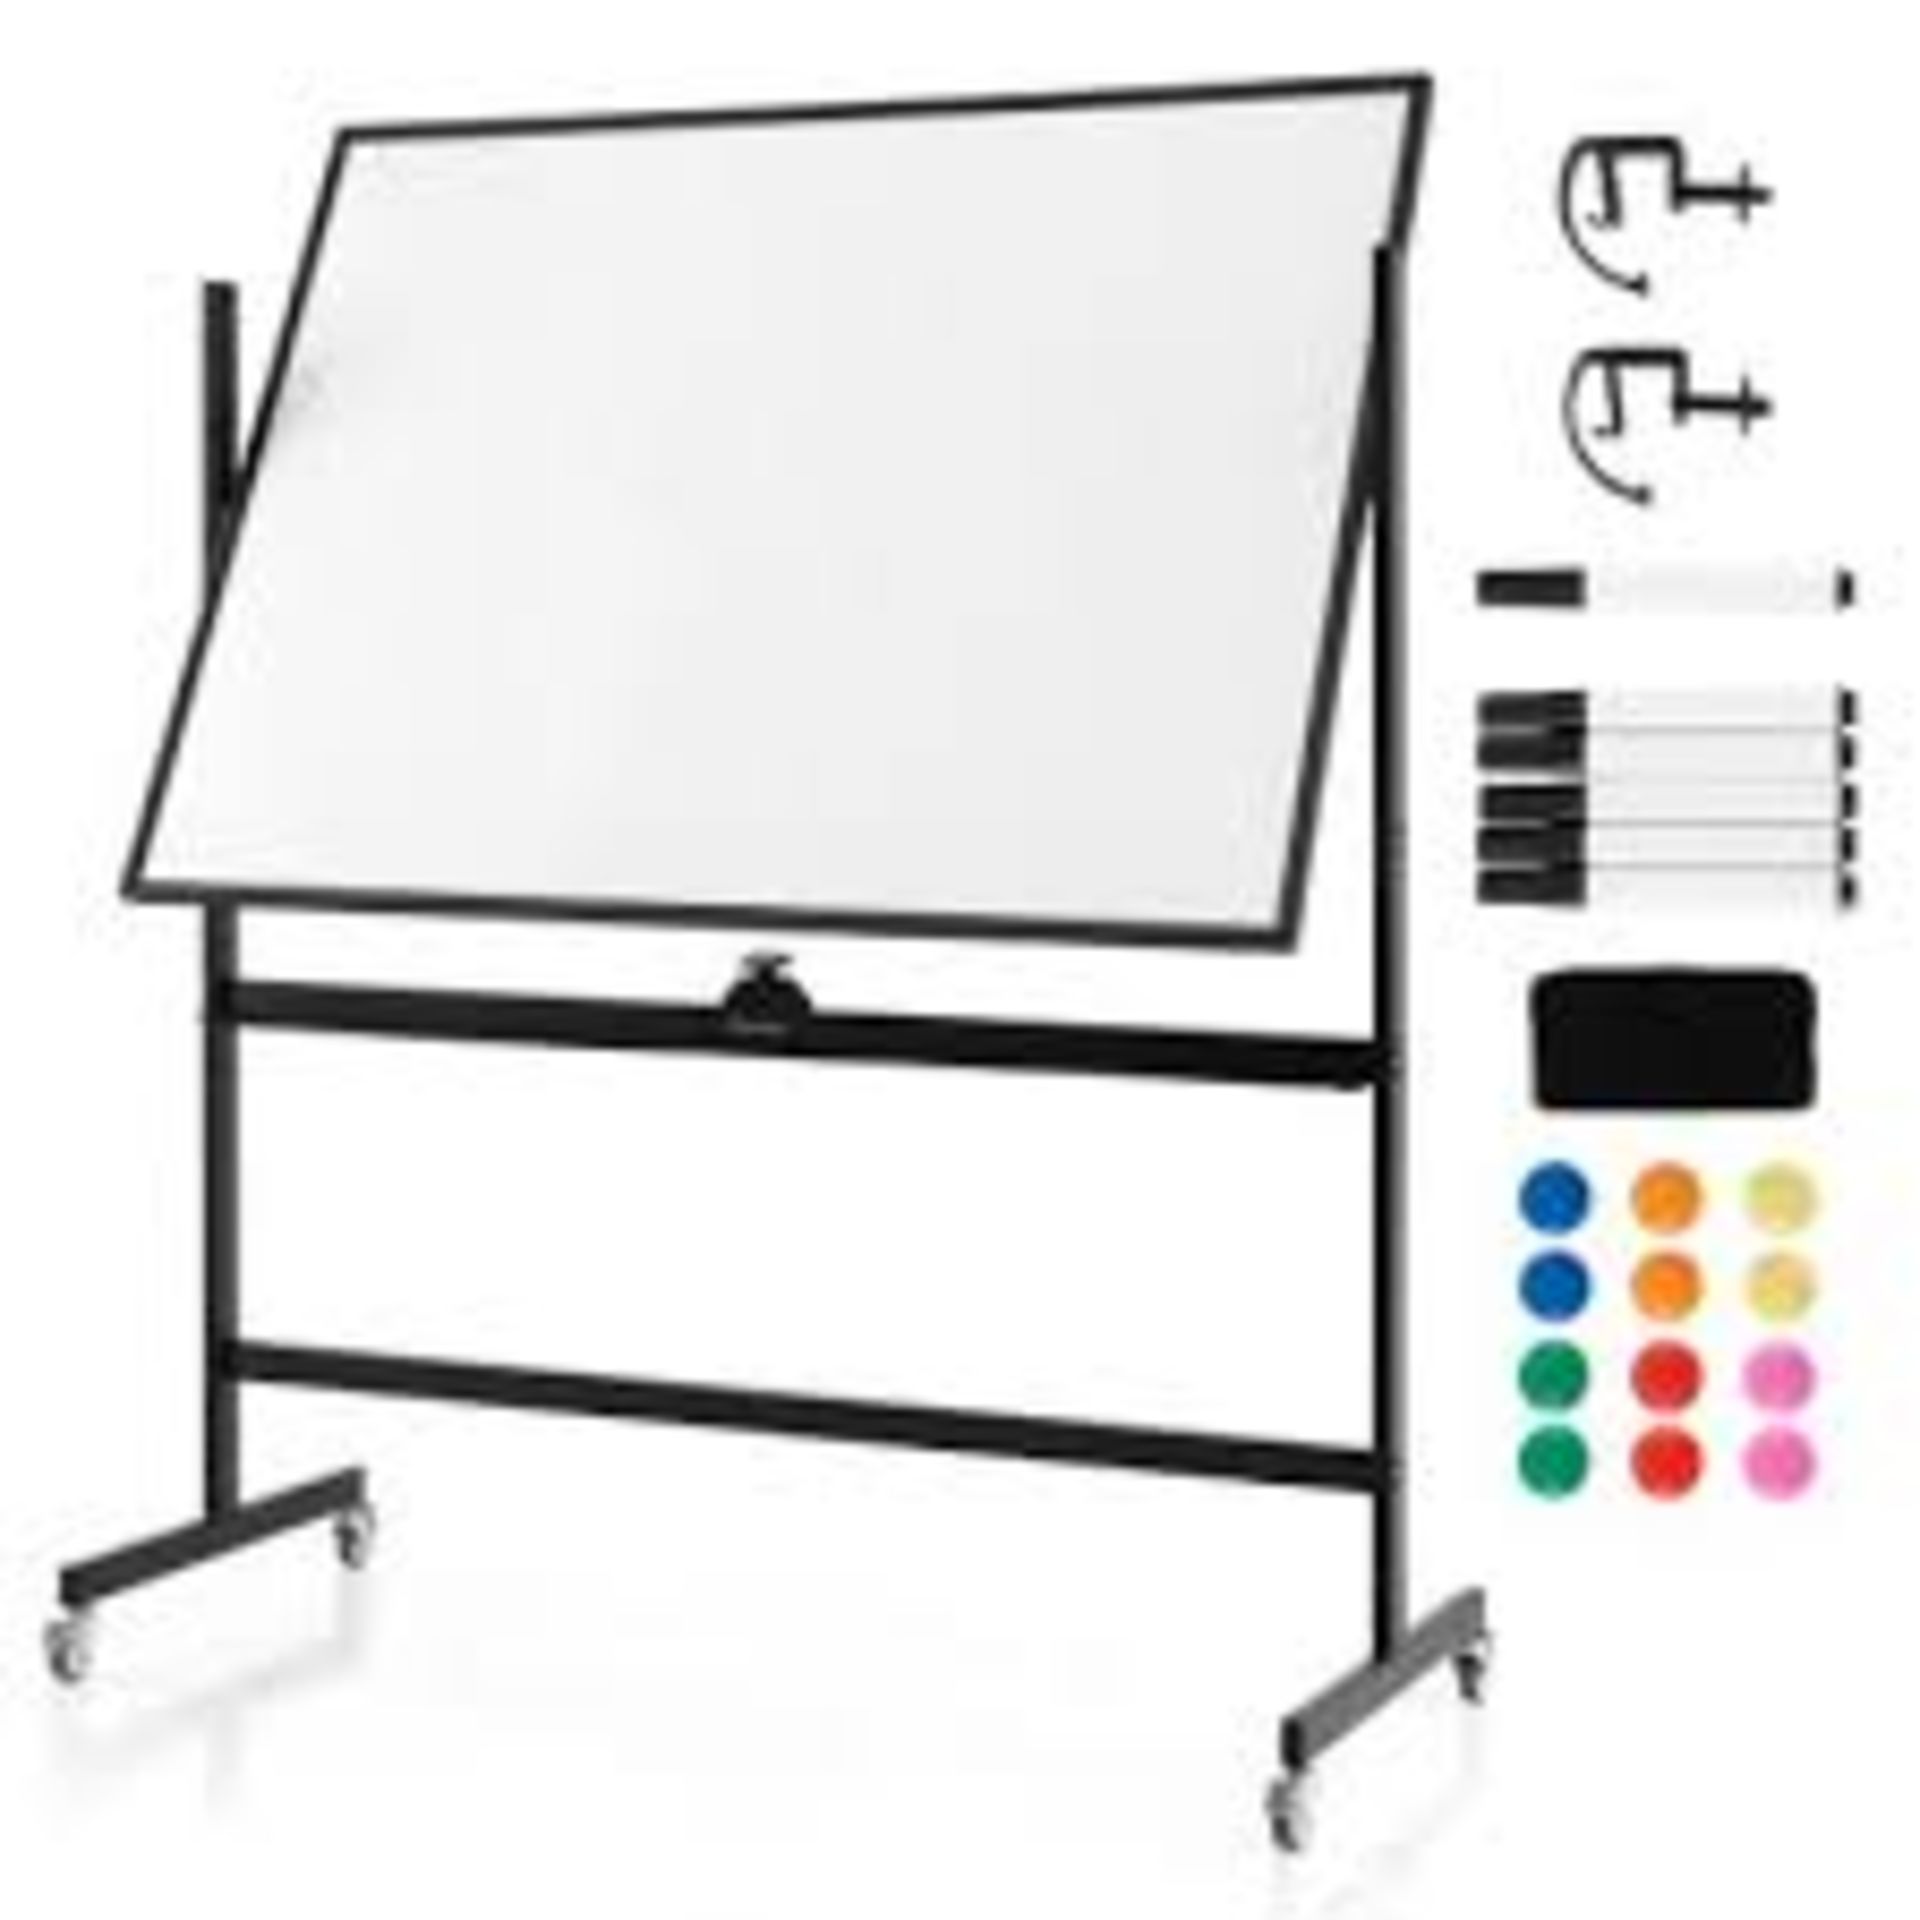 Mobile Magnetic Double-Sized Whiteboard with 4 Lockable Wheels. - R14.15. Inspire your creativity